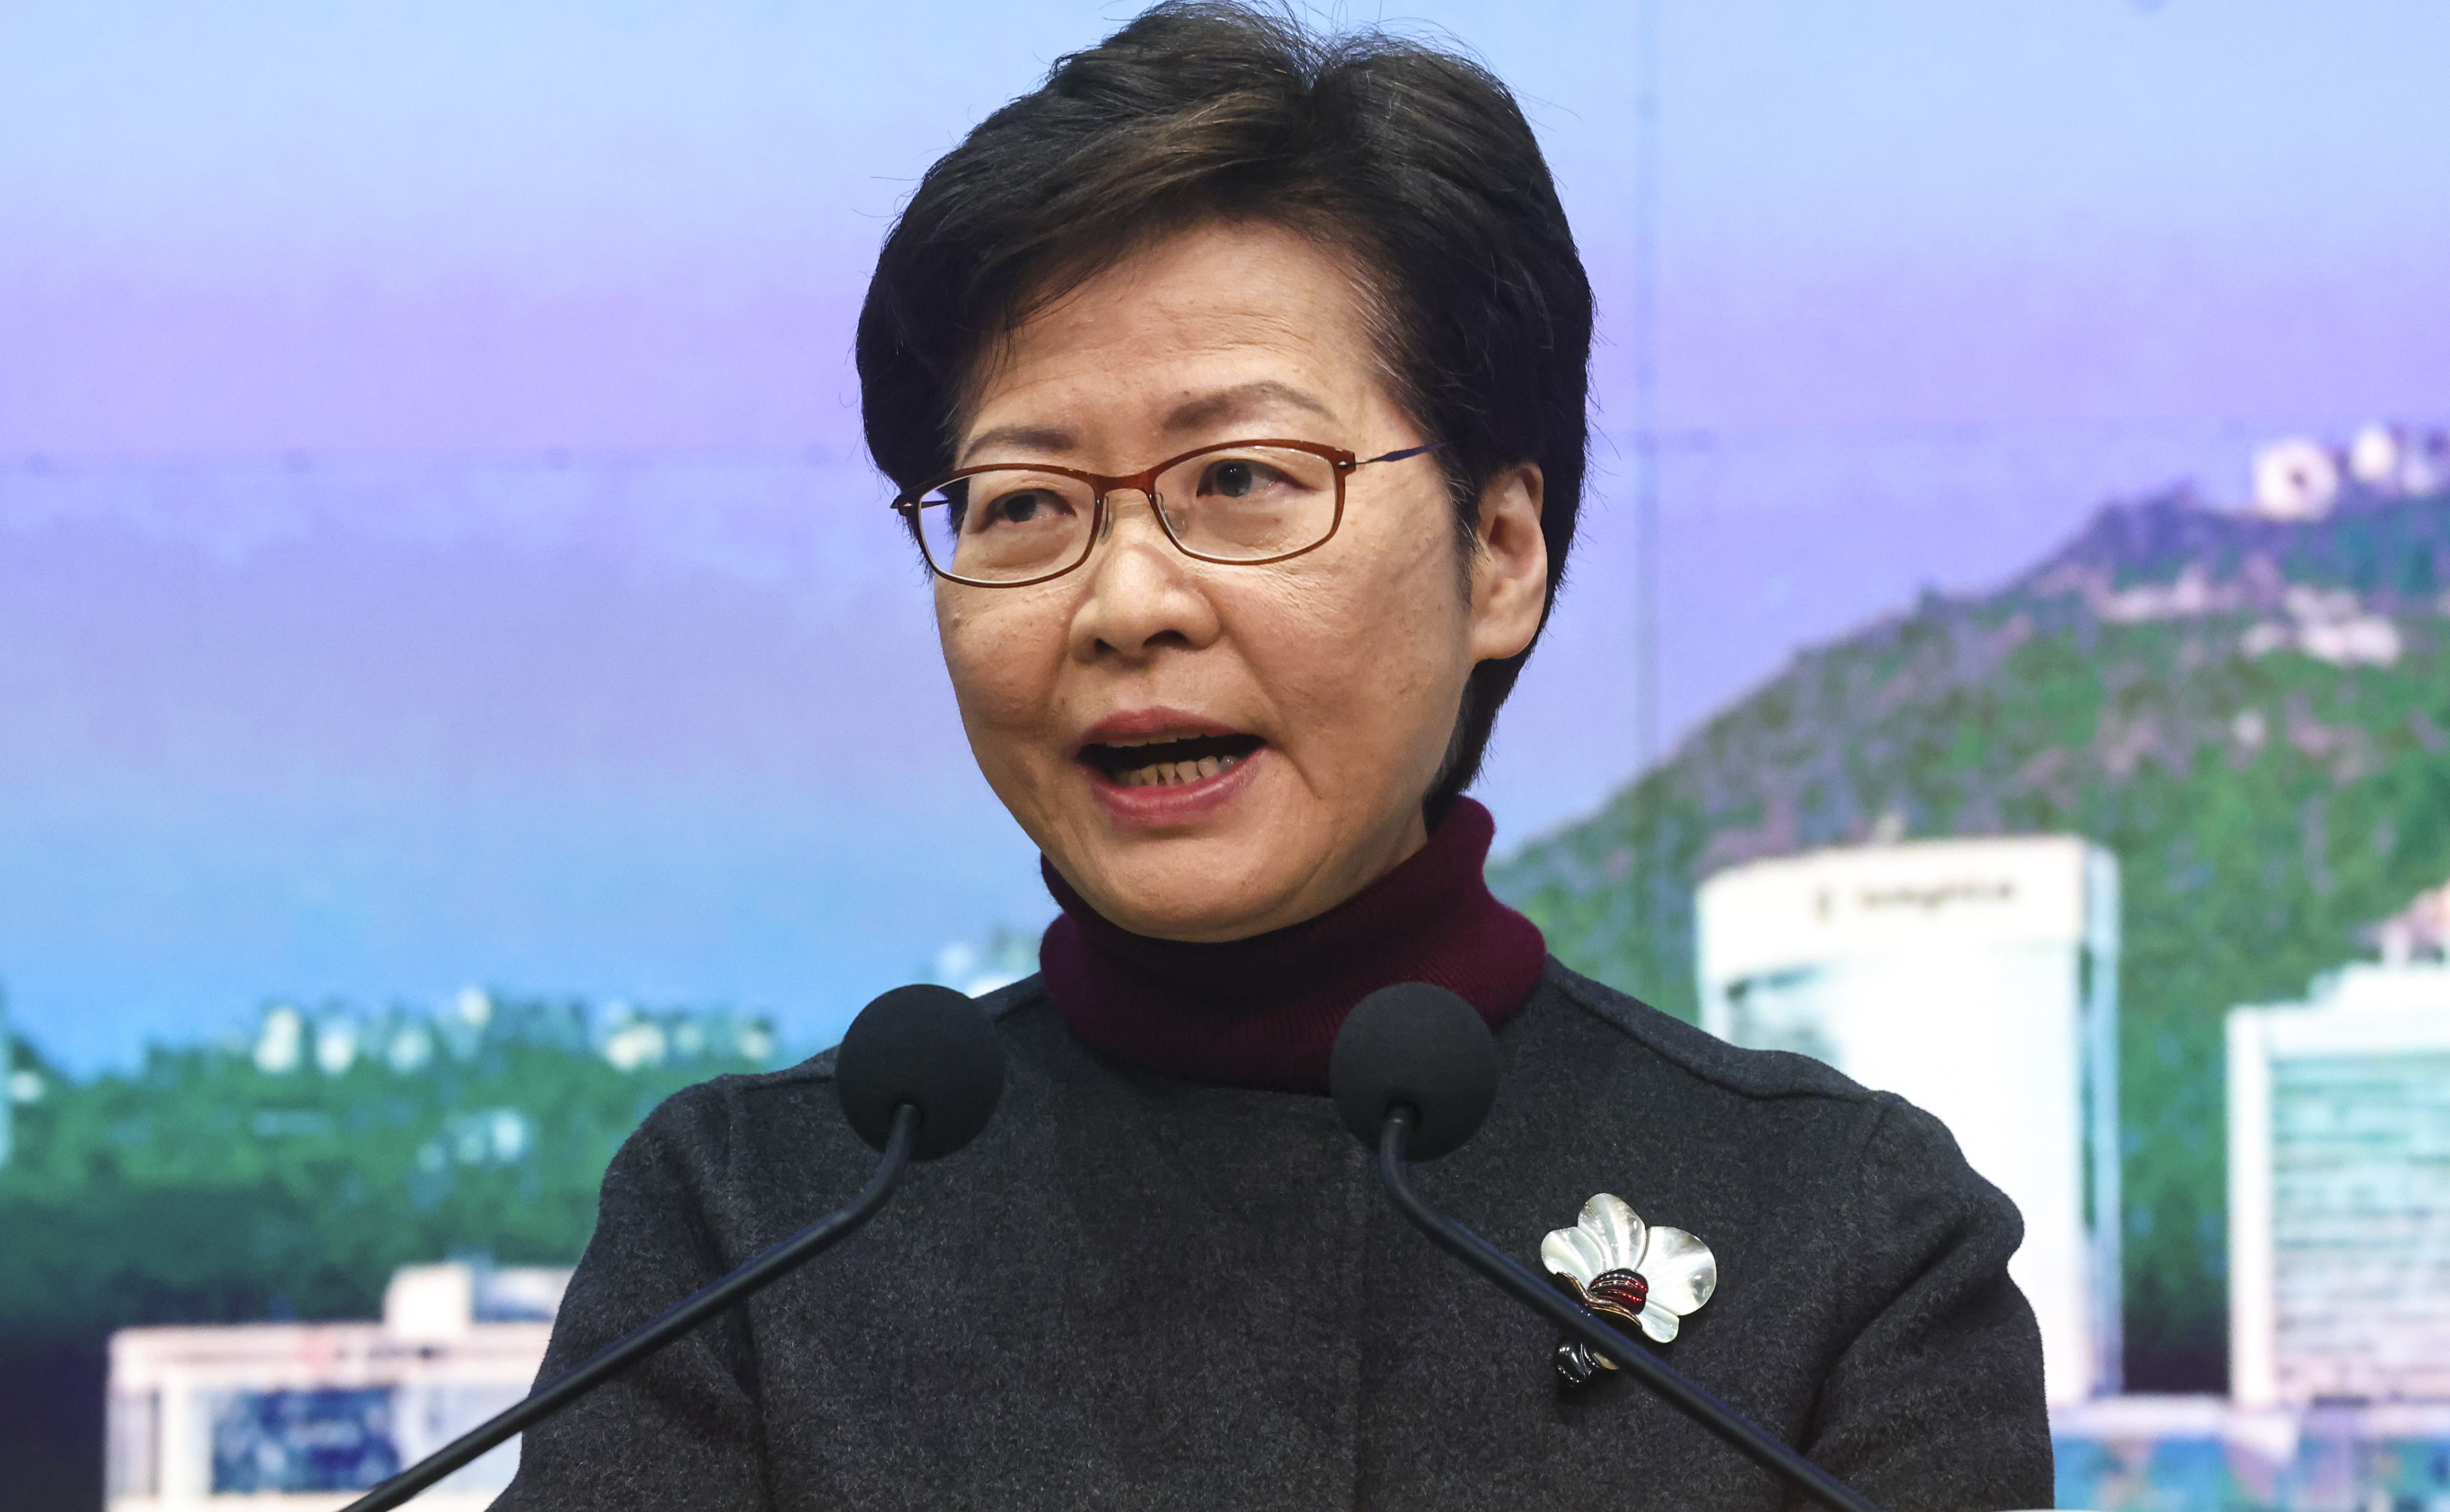 Chief Executive Carrie Lam said on Tuesday that next month’s leadership election would go ahead as planned. Photo: K. Y. Cheng